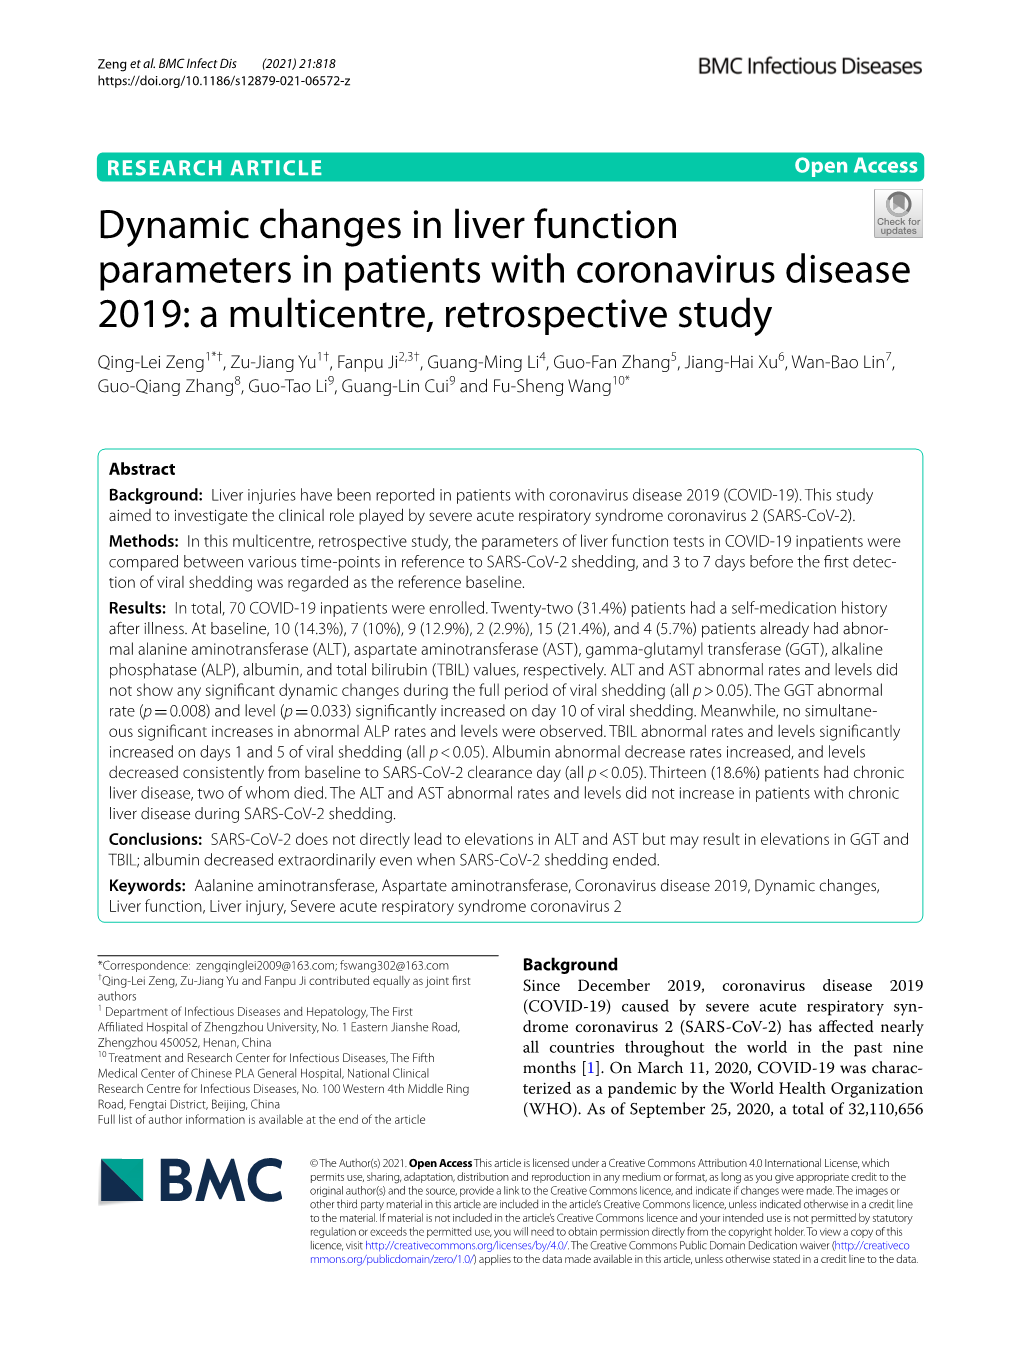 Dynamic Changes in Liver Function Parameters in Patients With